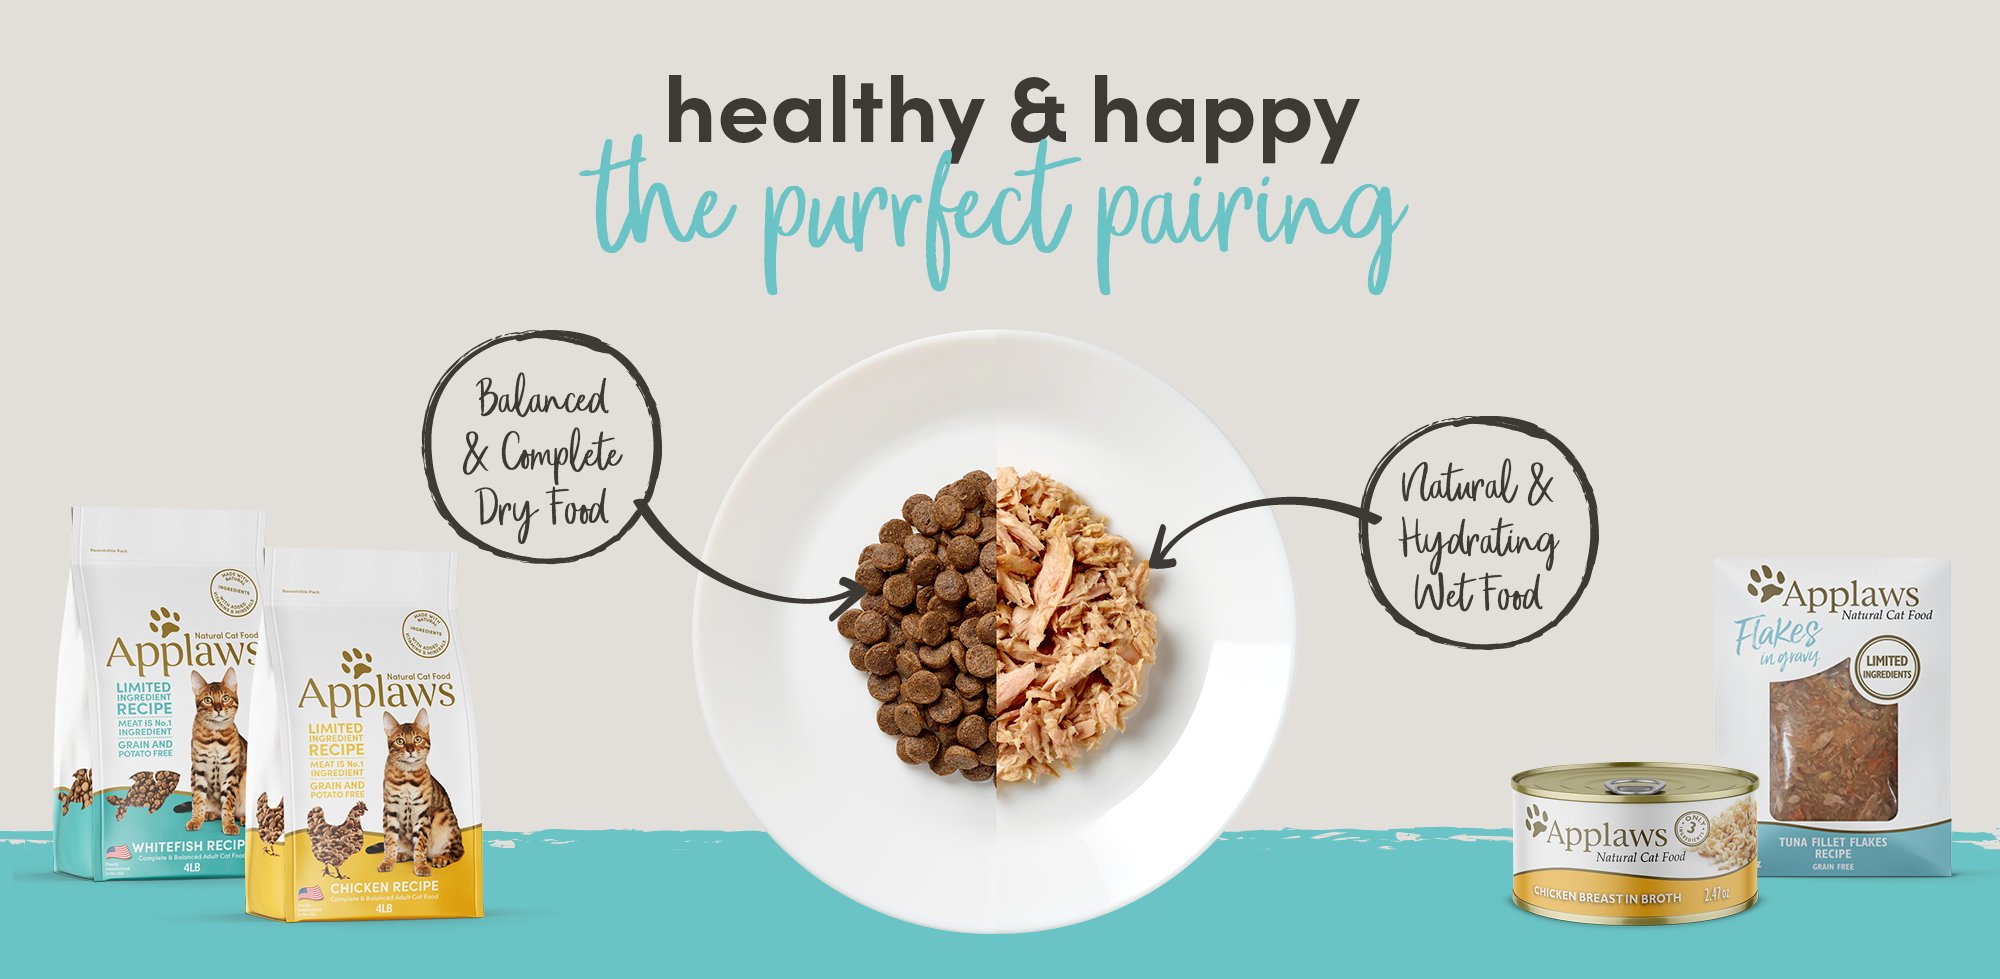 Healthy and happy.  the purfect pairing - balanced and complete dry food with natural and hydrating wet food